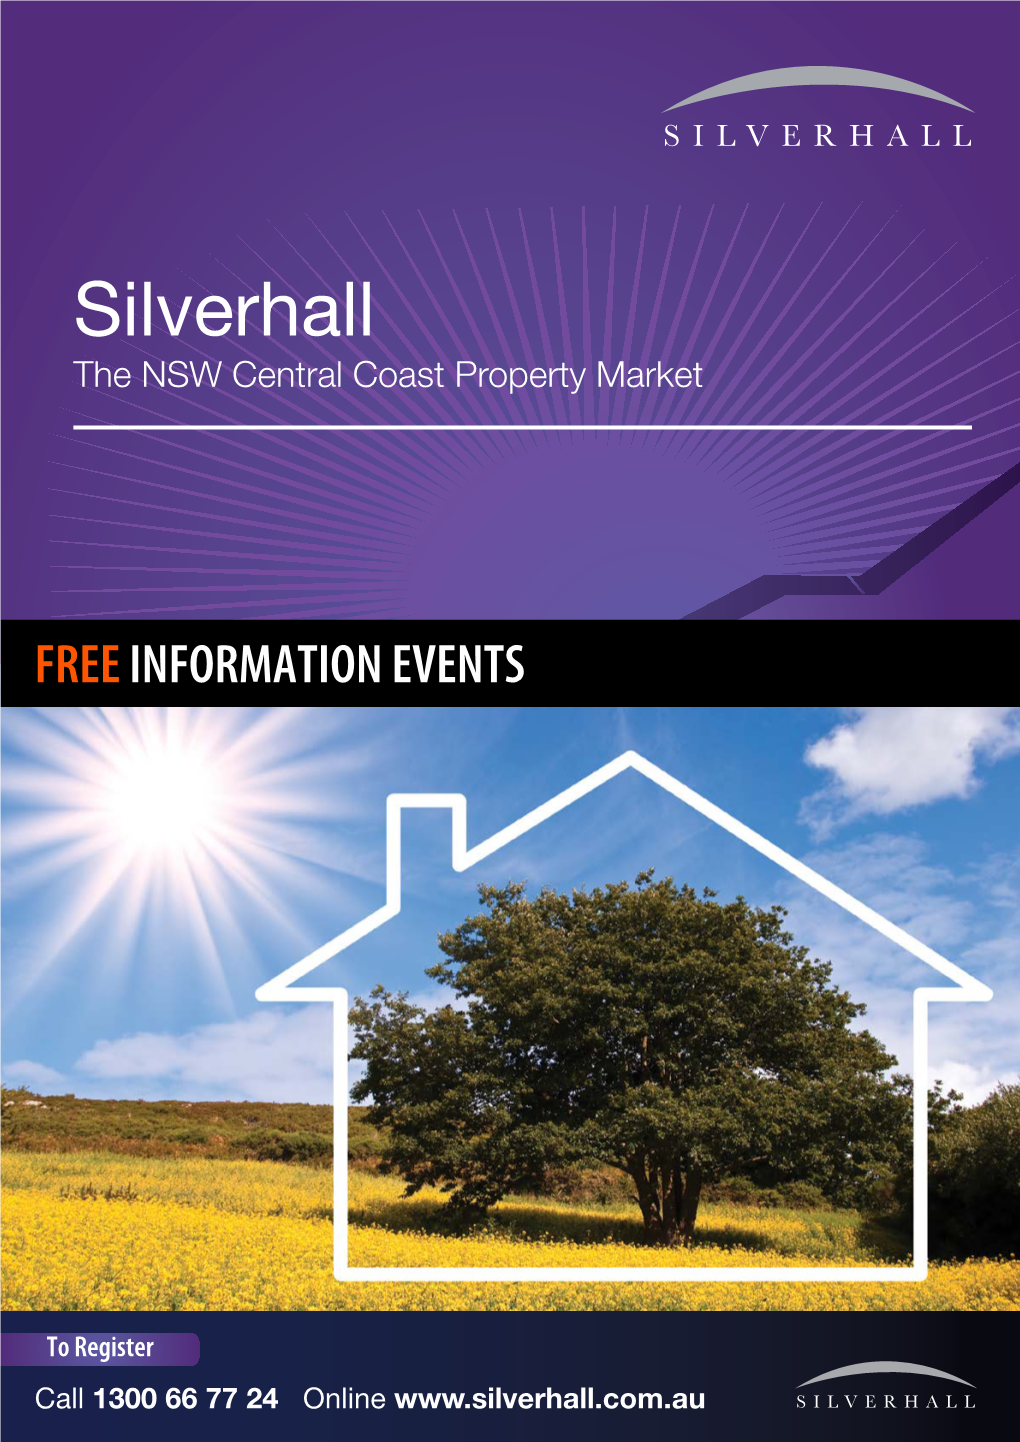 The NSW Central Coast Property Market